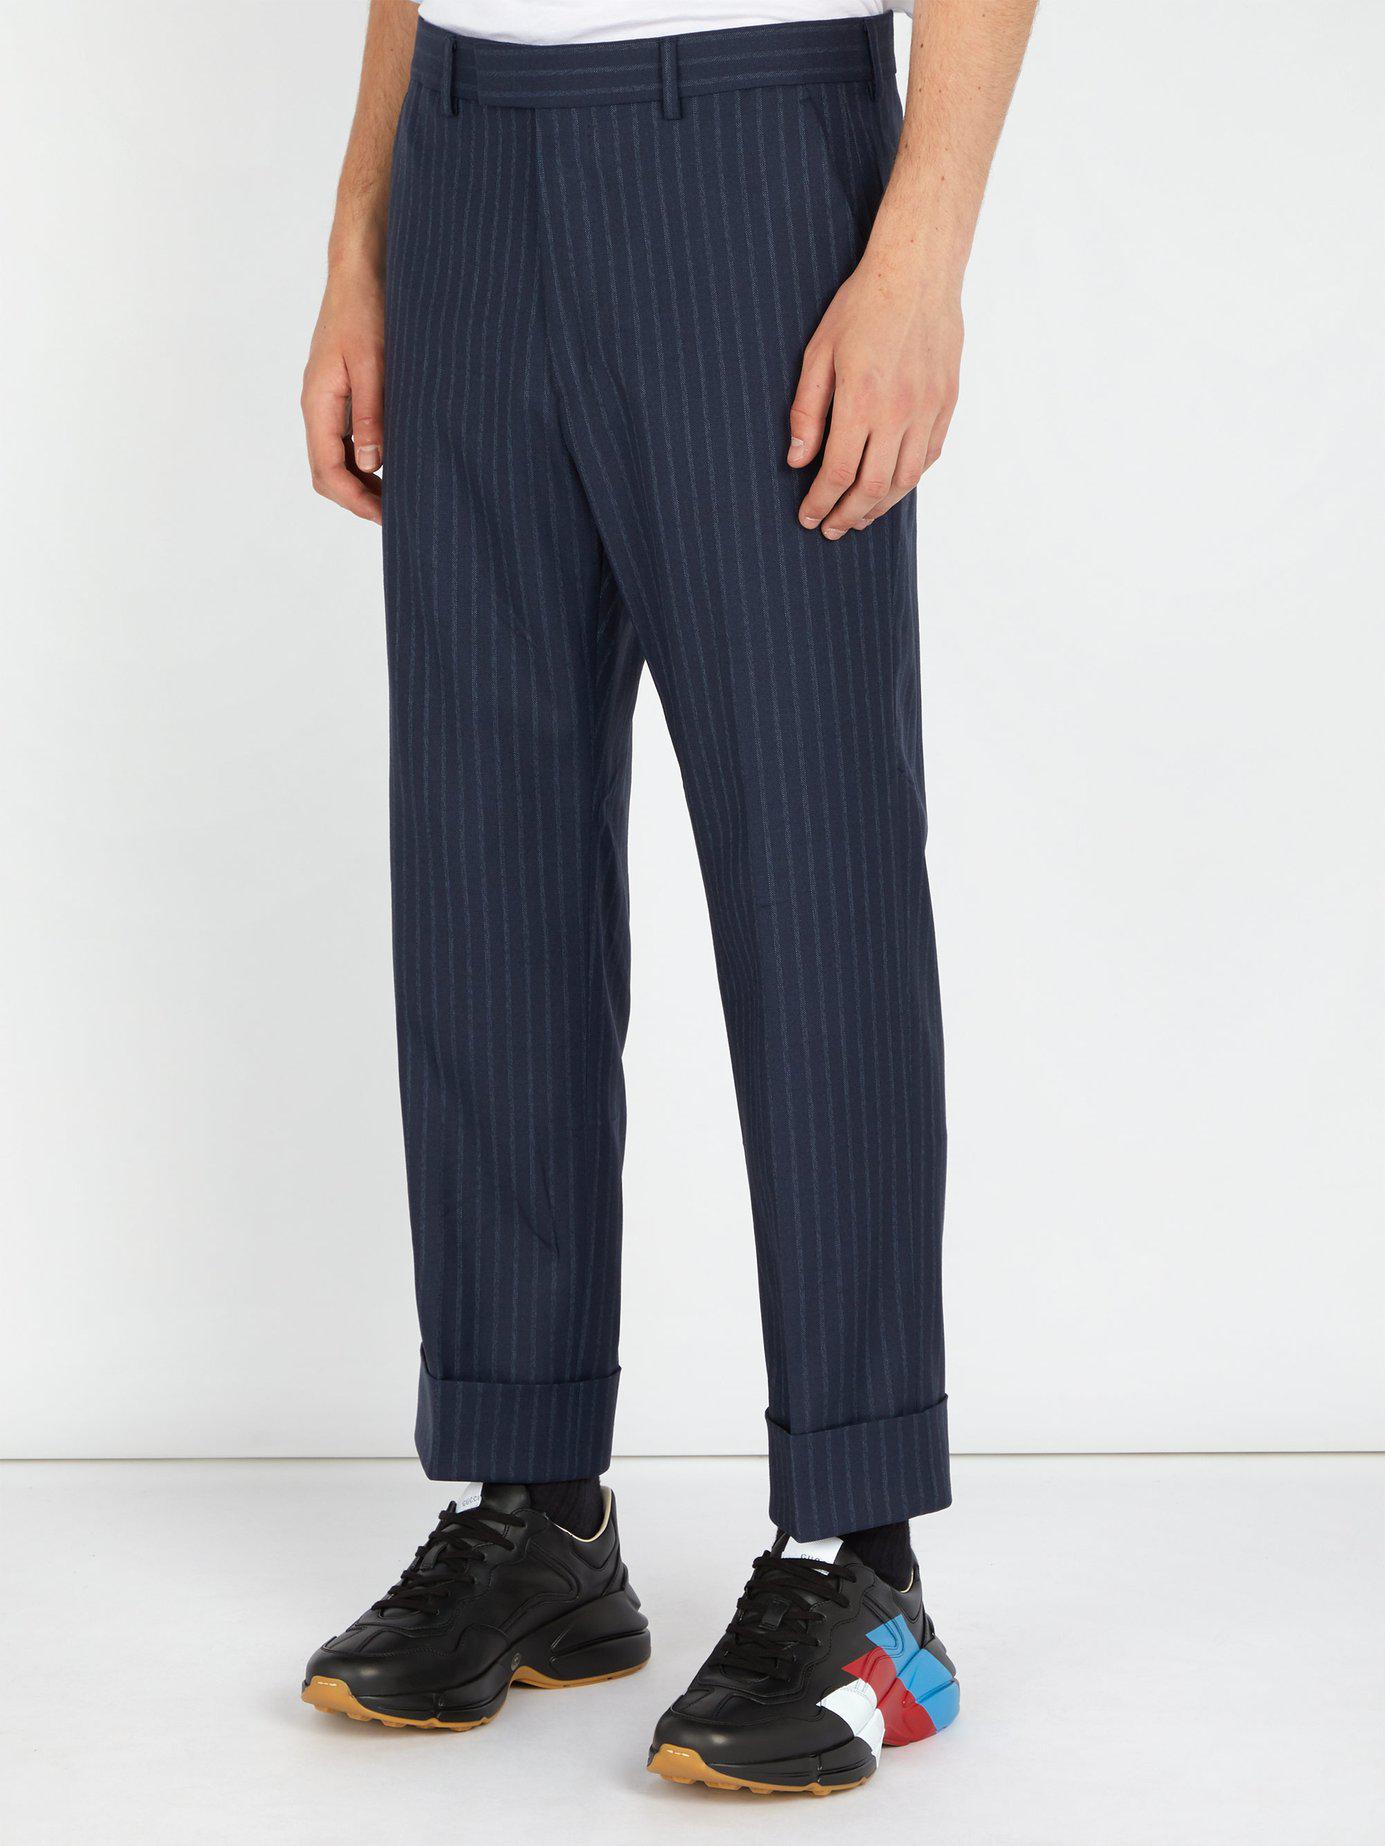 Gucci Slim Fit Striped Wool Trousers in Navy (Blue) for Men - Lyst